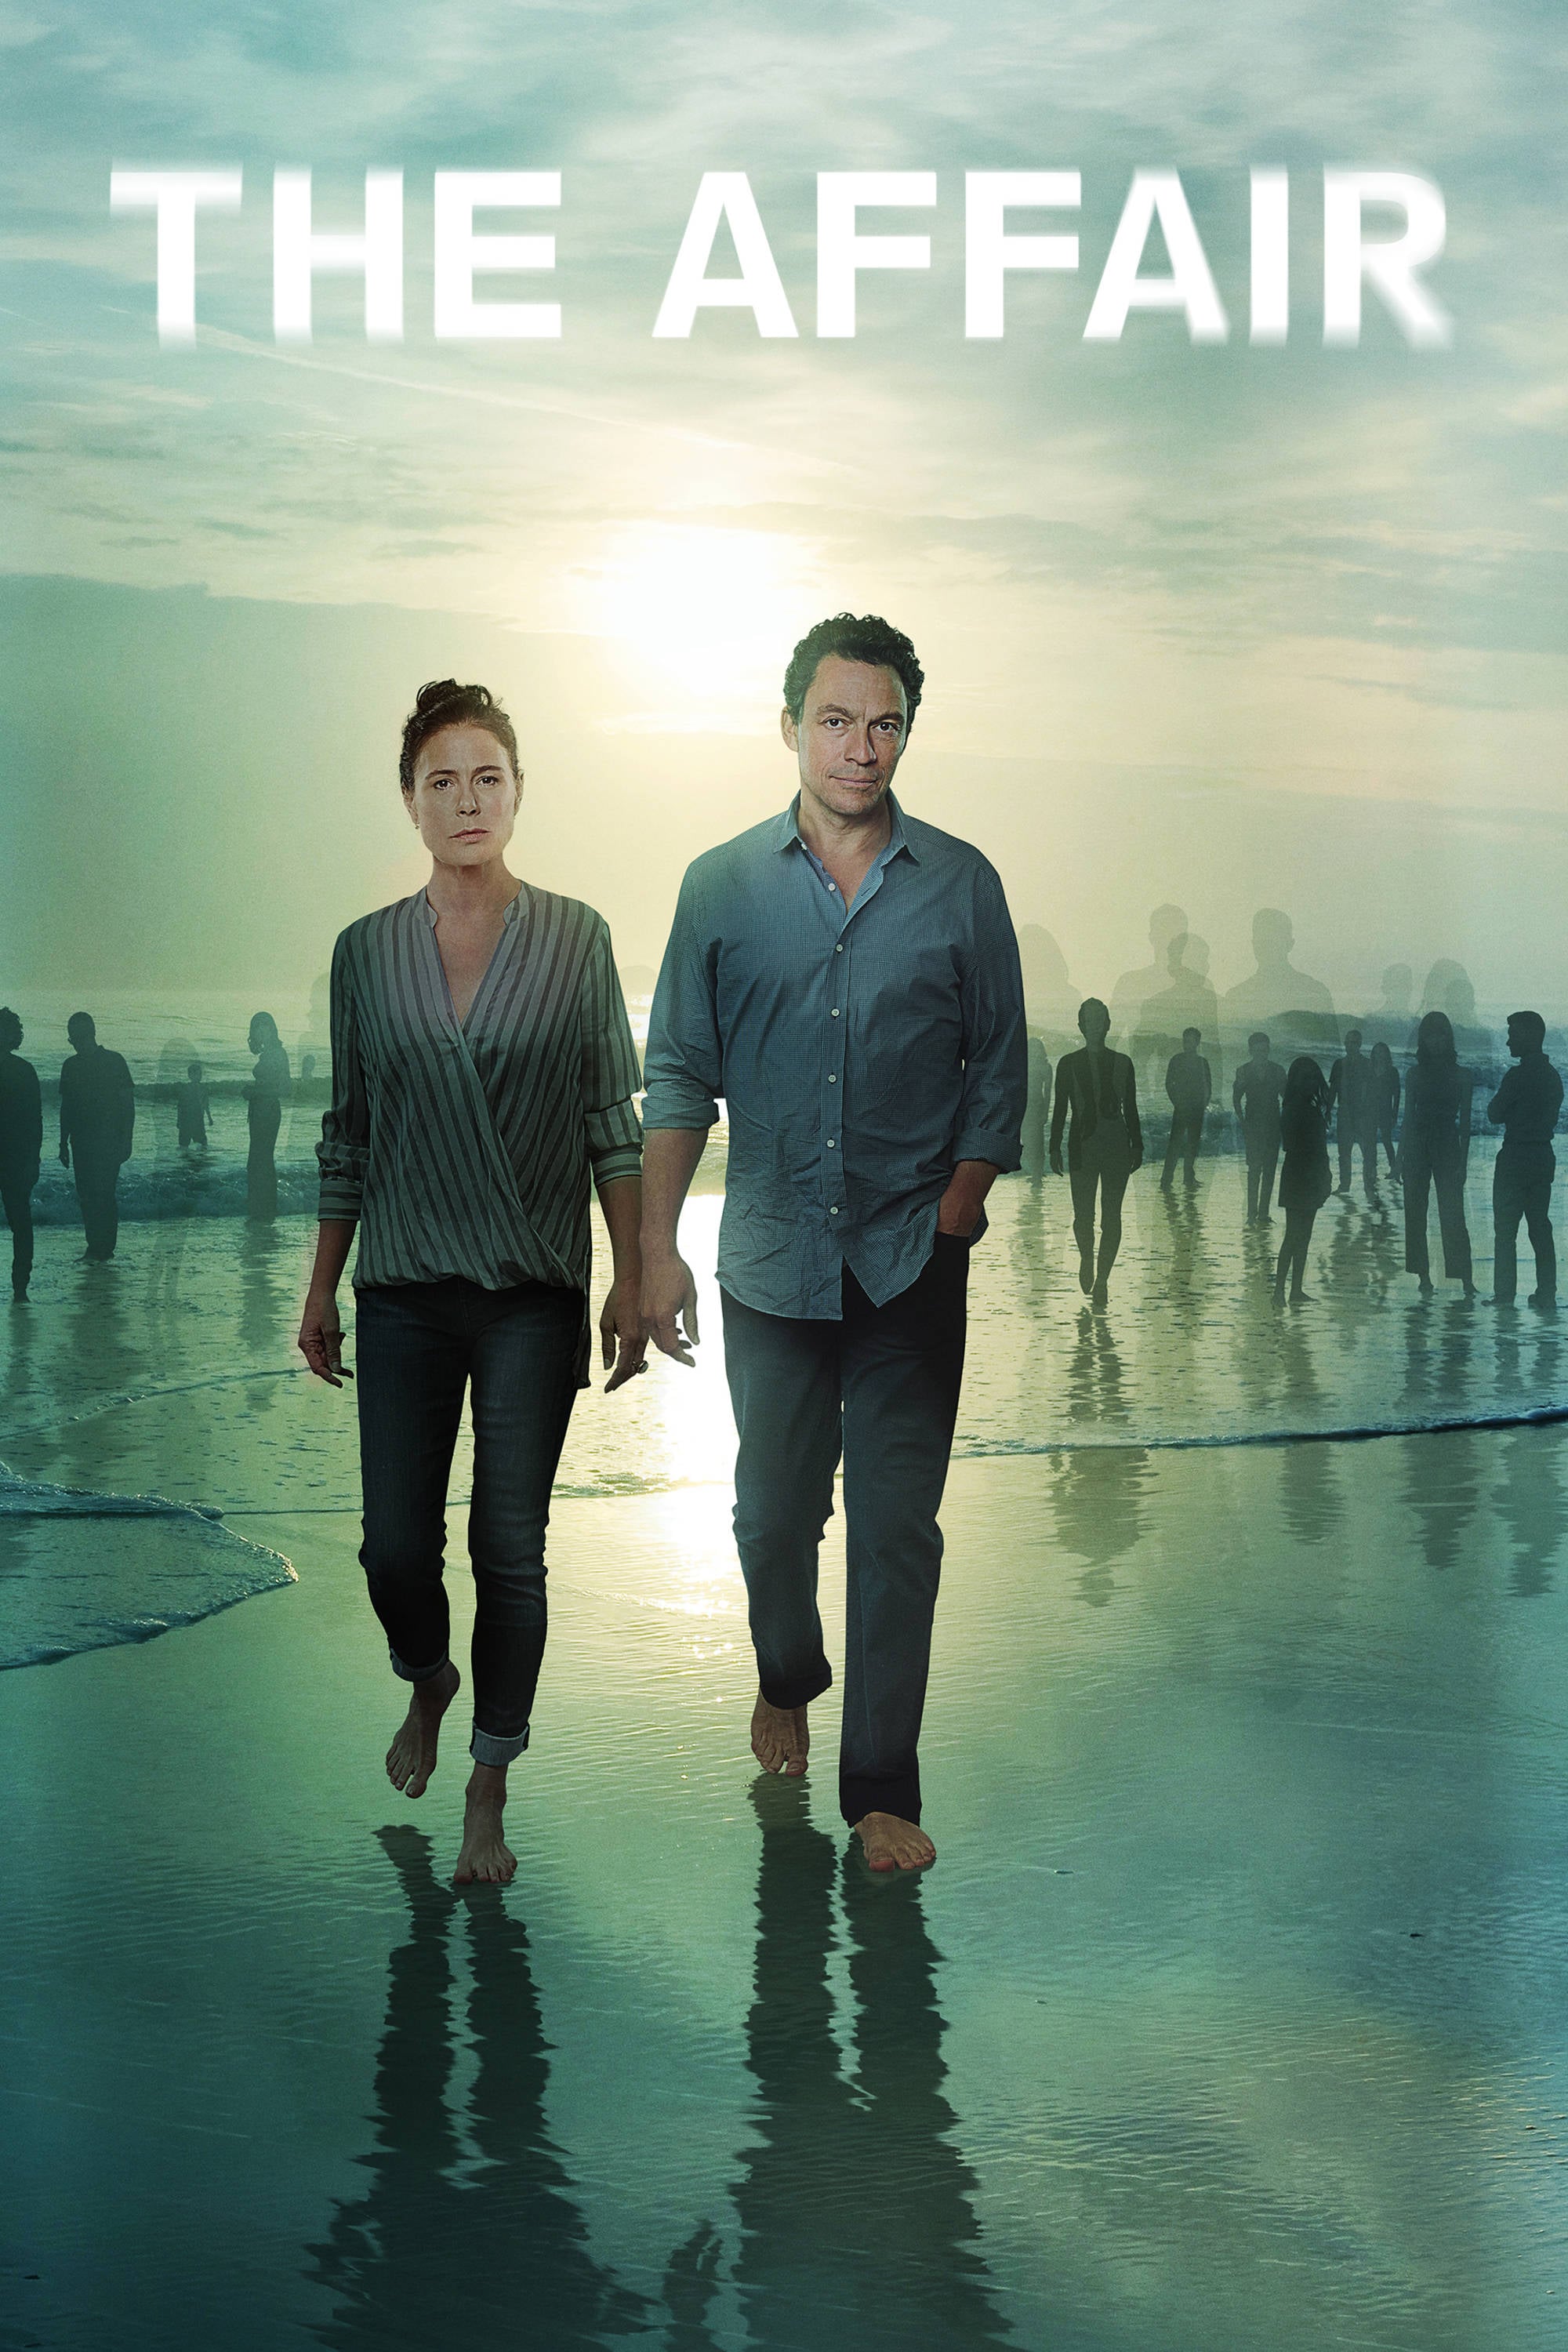 The Affair rating